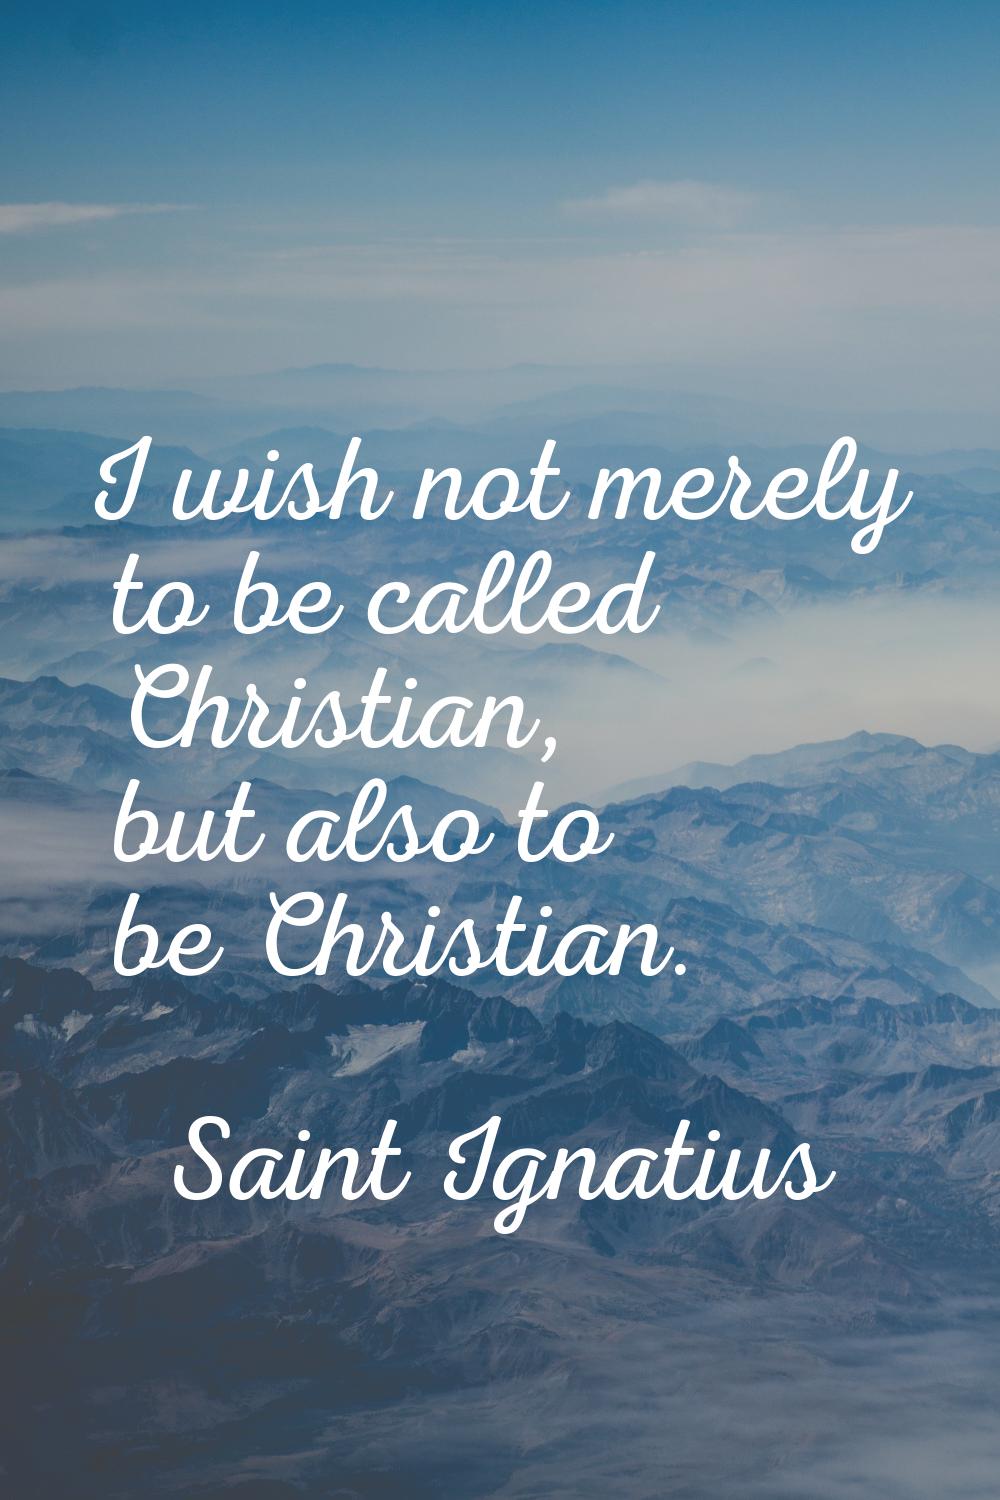 I wish not merely to be called Christian, but also to be Christian.